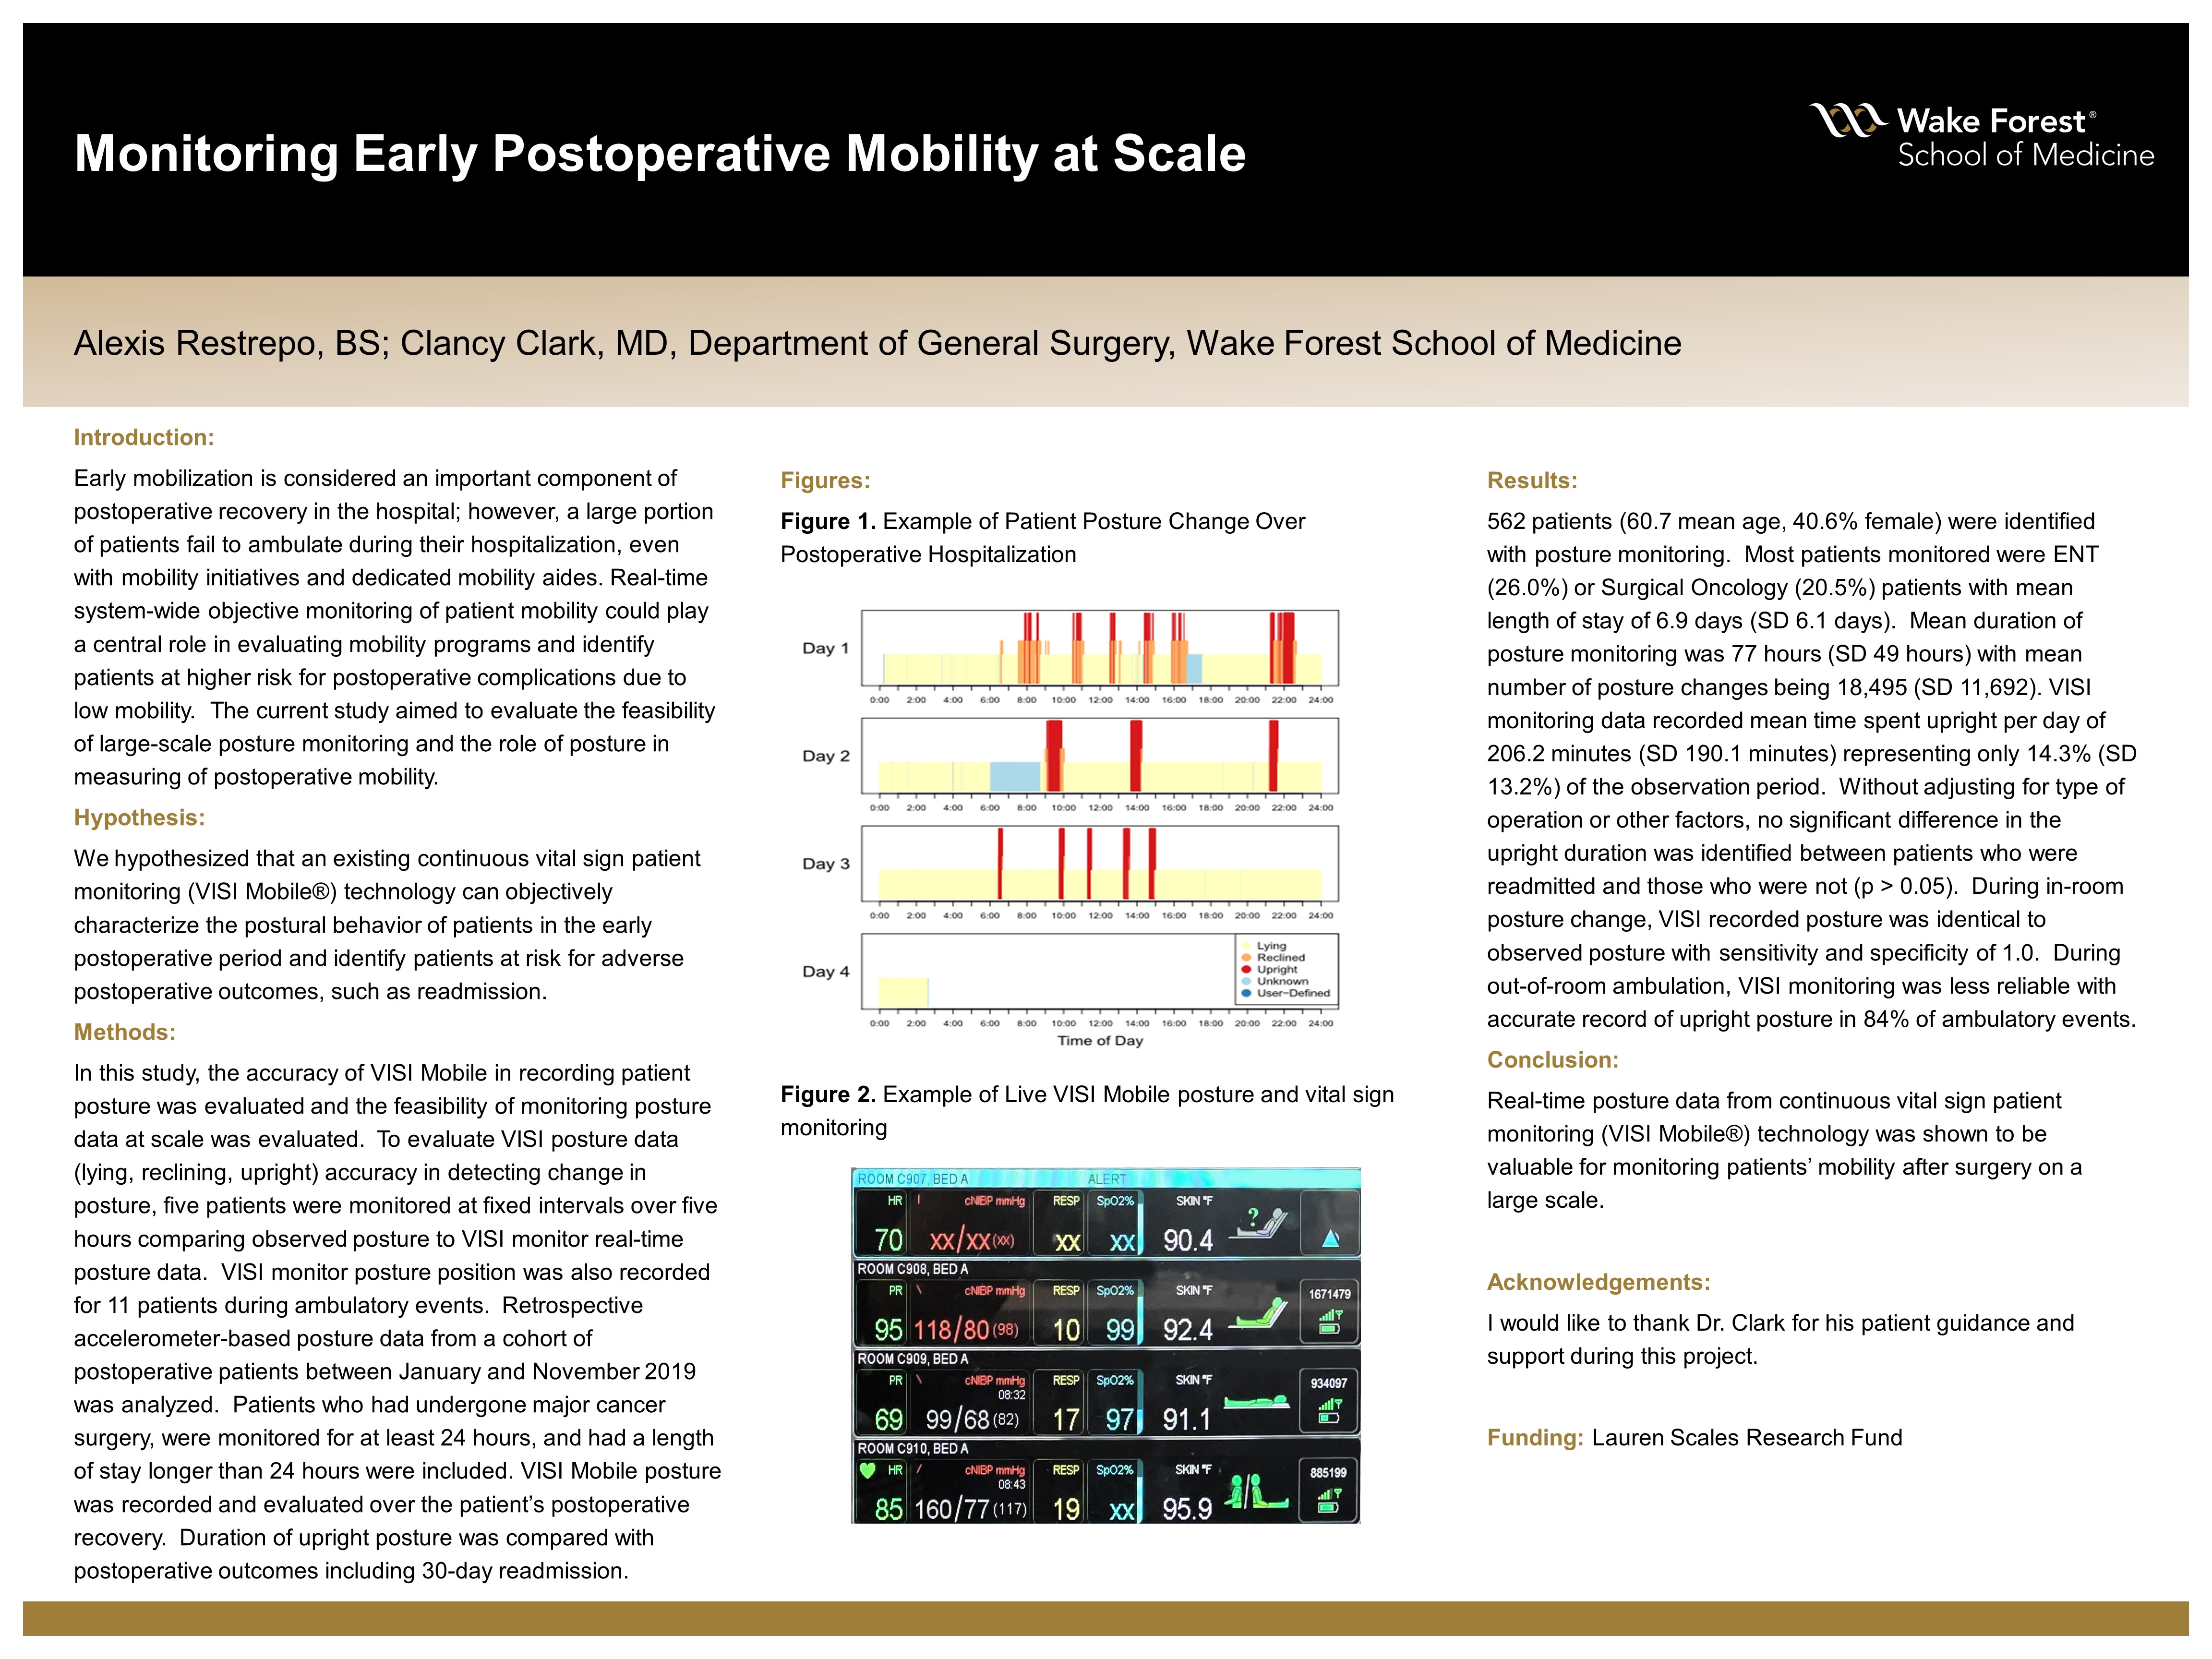 Showcase Image for Monitoring Early Postoperative Mobility at Scale